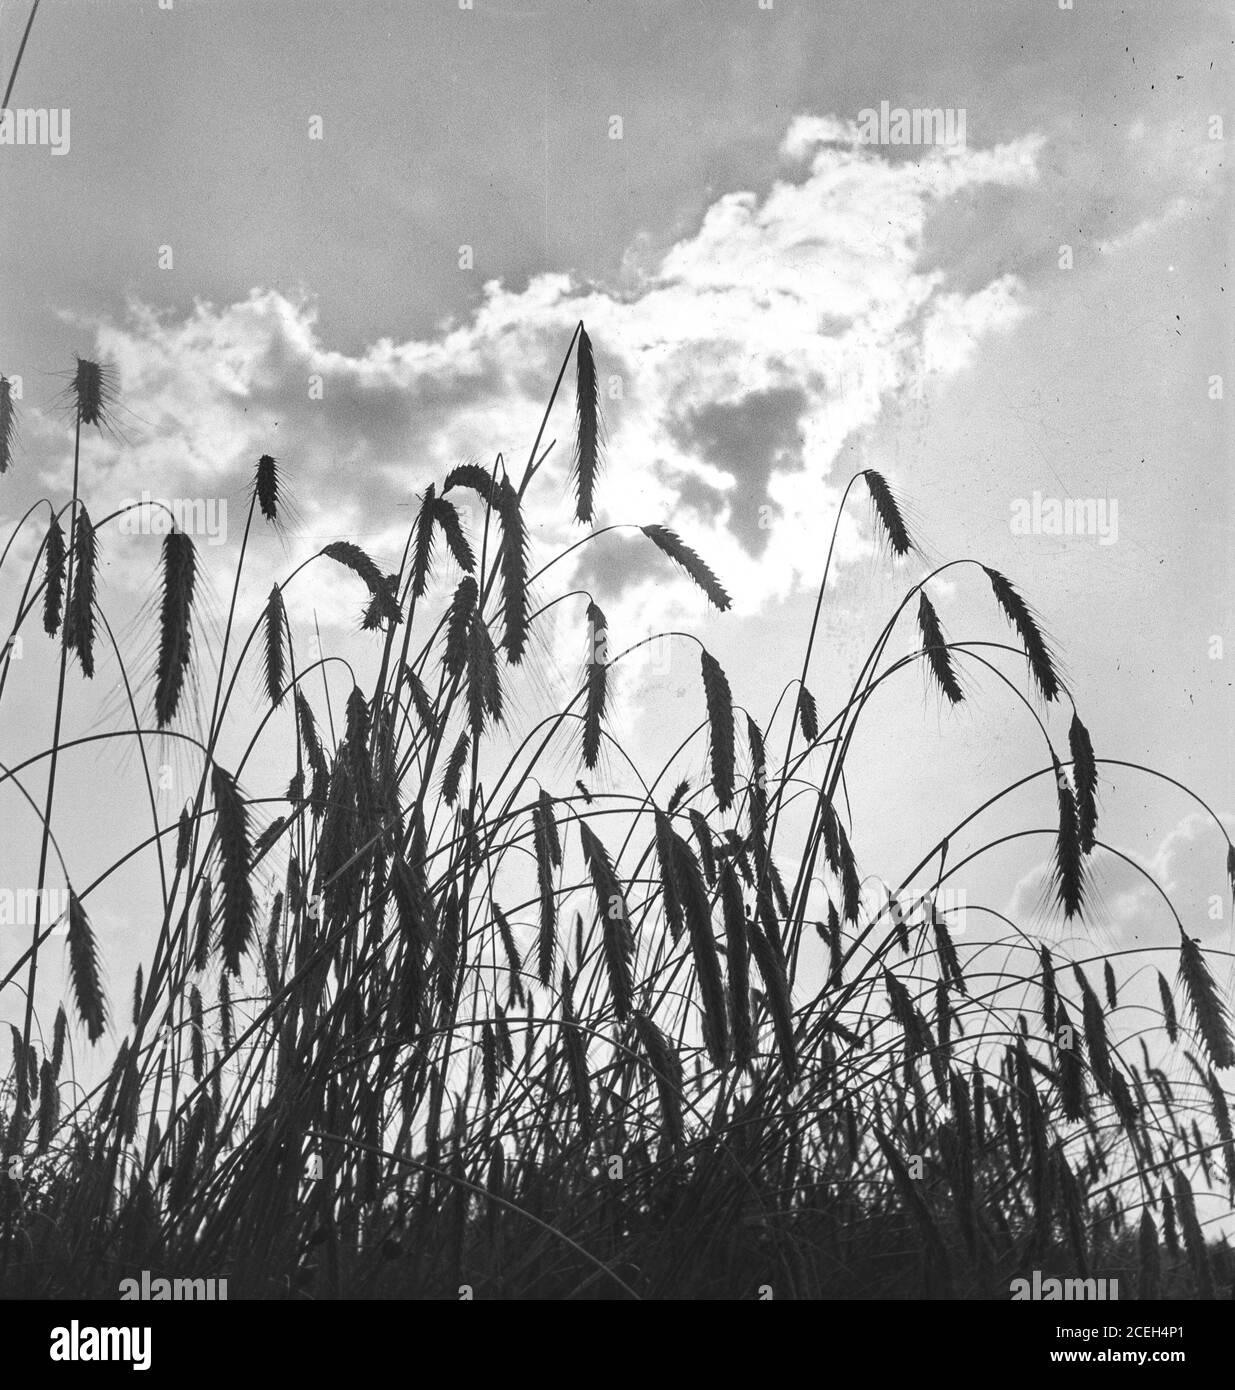 Black and white shot of wheat in grass growing against sunny sky with clouds, Belgium. Stock Photo